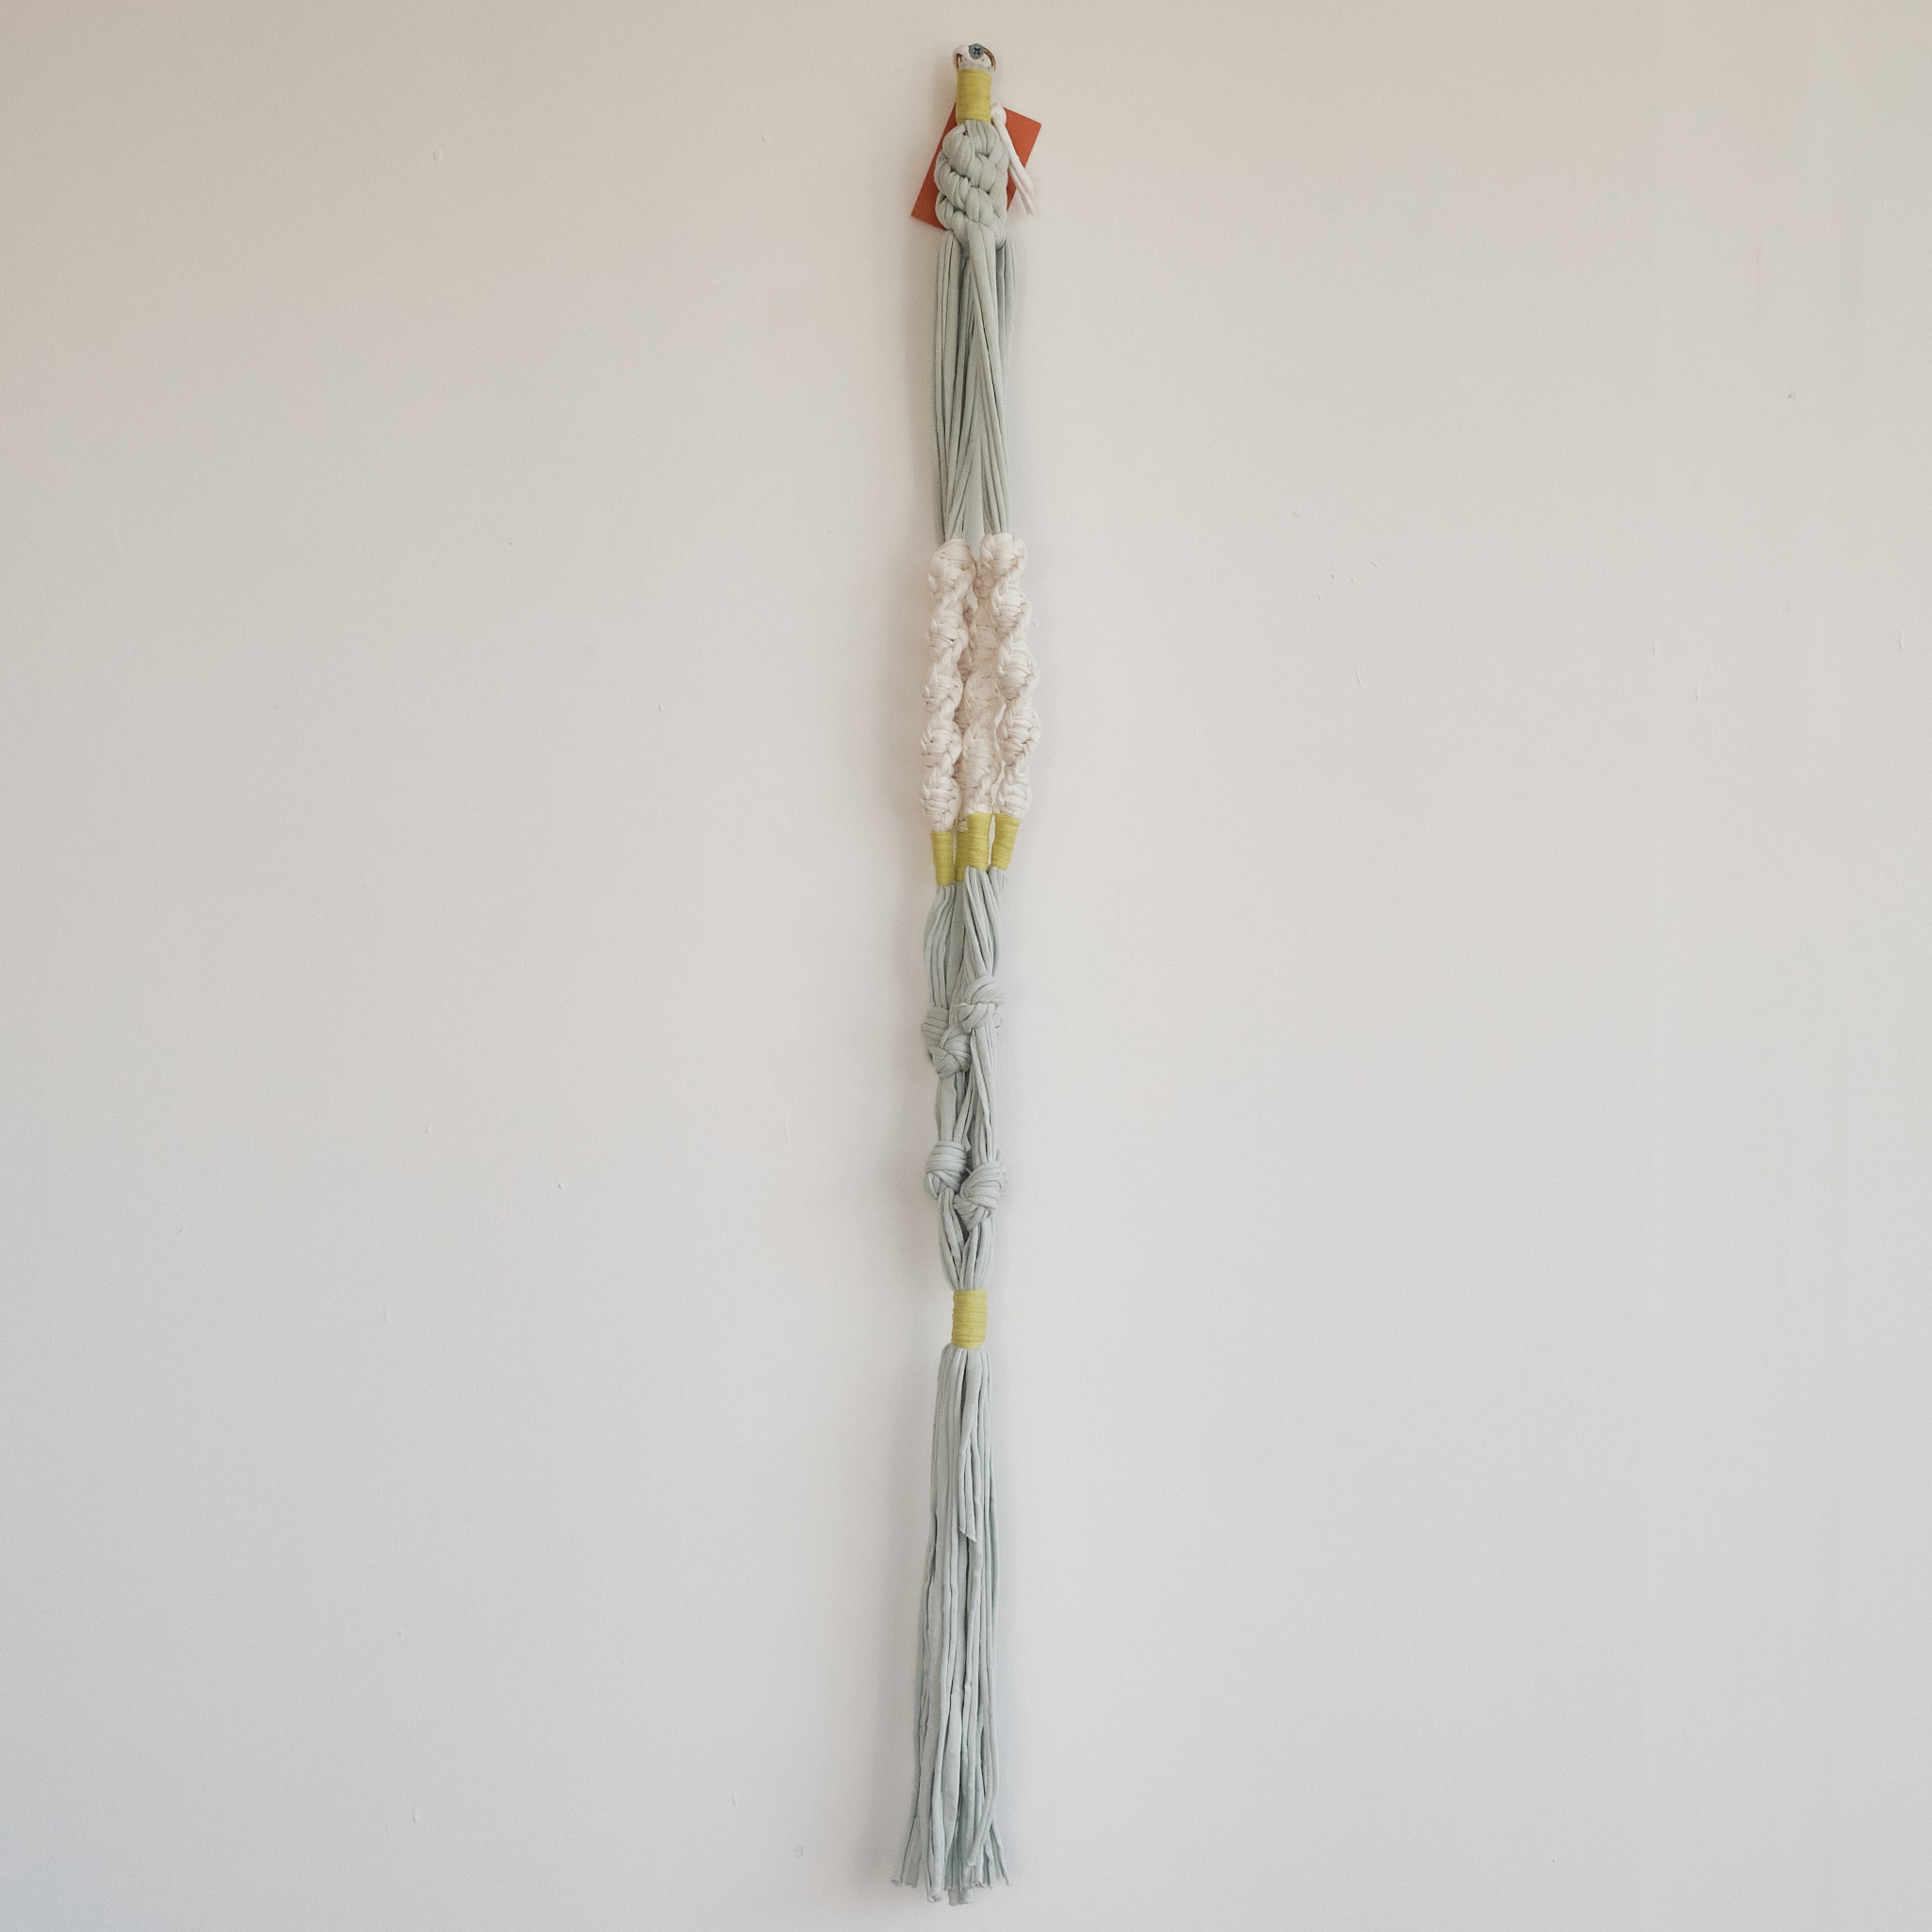 Sarora Knots Recycled Cotton Plant Hanger - Long in Mint, White & Yellow